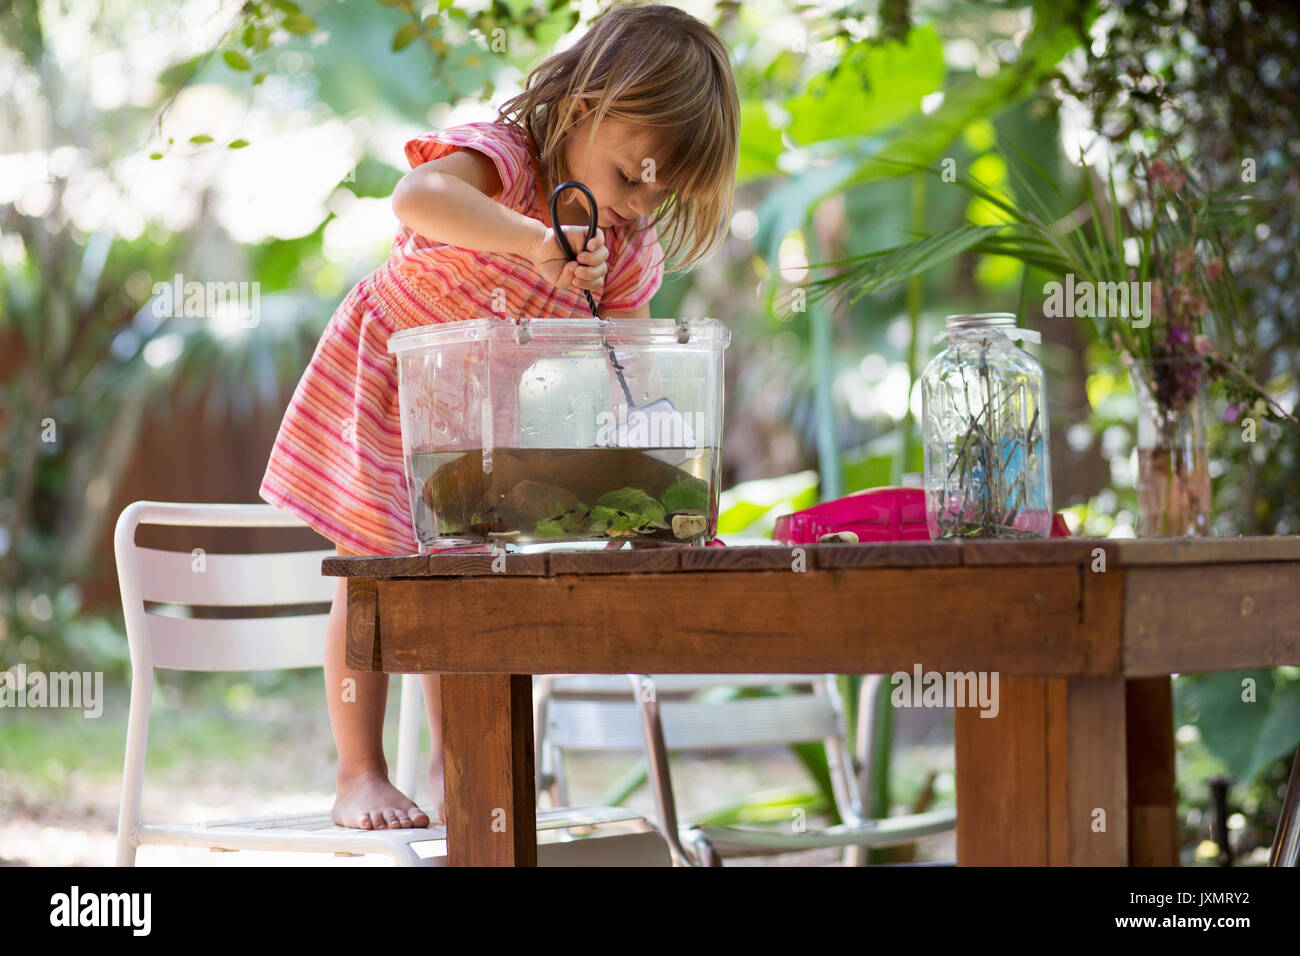 Girl standing on chair to scoop fishing net in plastic tadpole pond on garden table Stock Photo